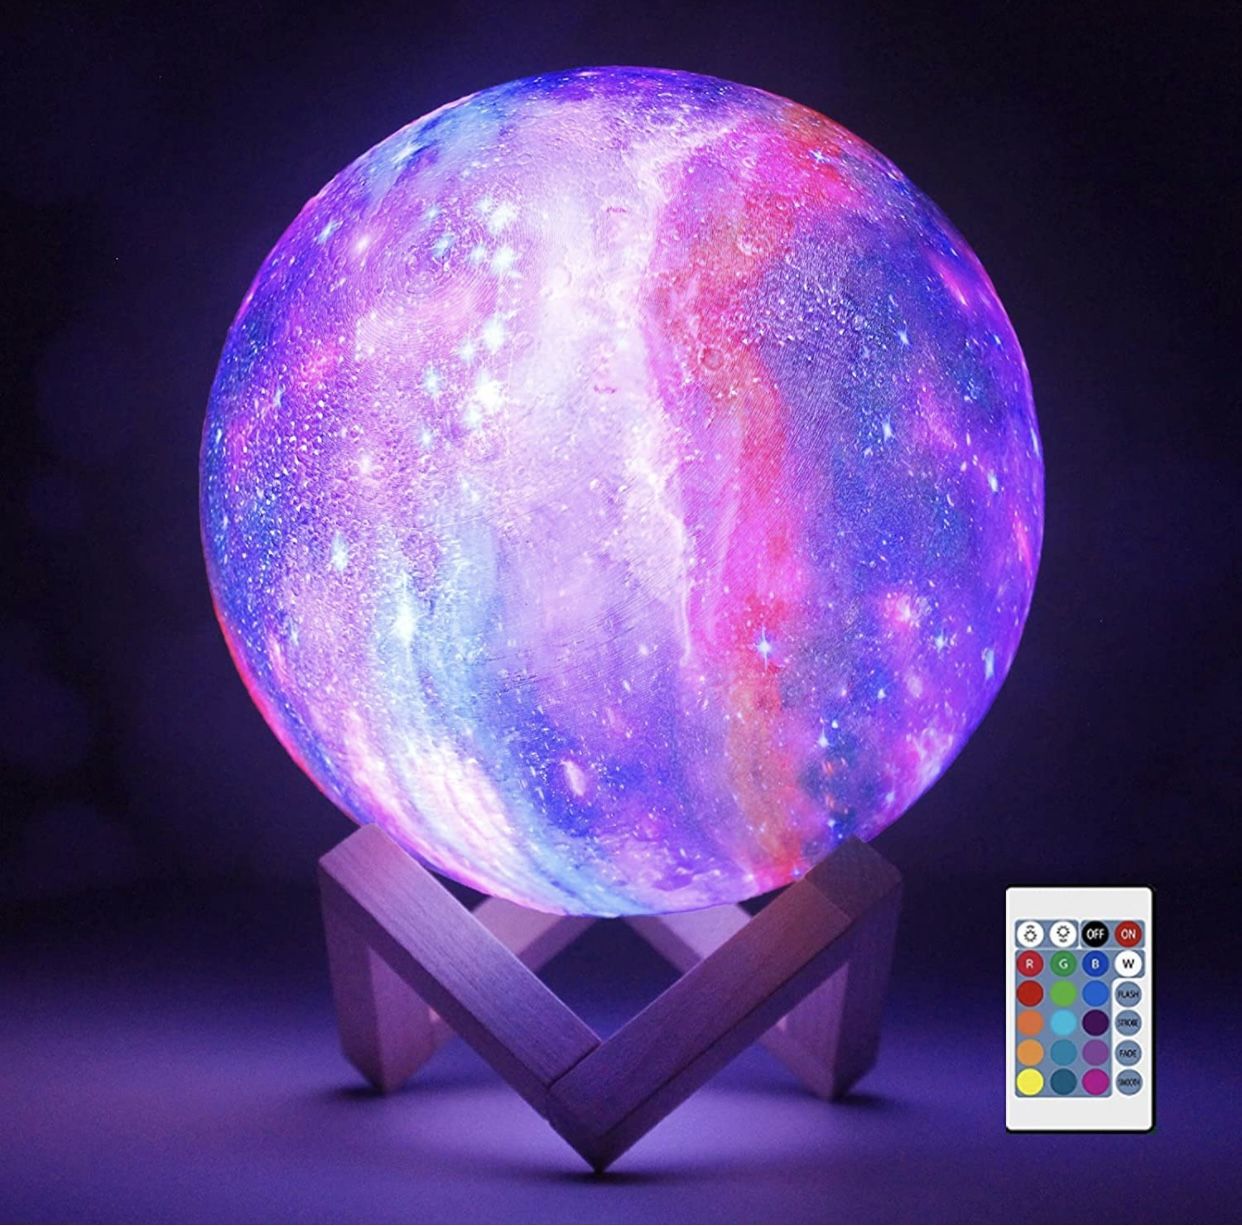 3D Galaxy Moon Lamp by NSL Lighting - Cool Kids Galaxy Moon Night Light with 16 LED Colors, Touch & Remote Control